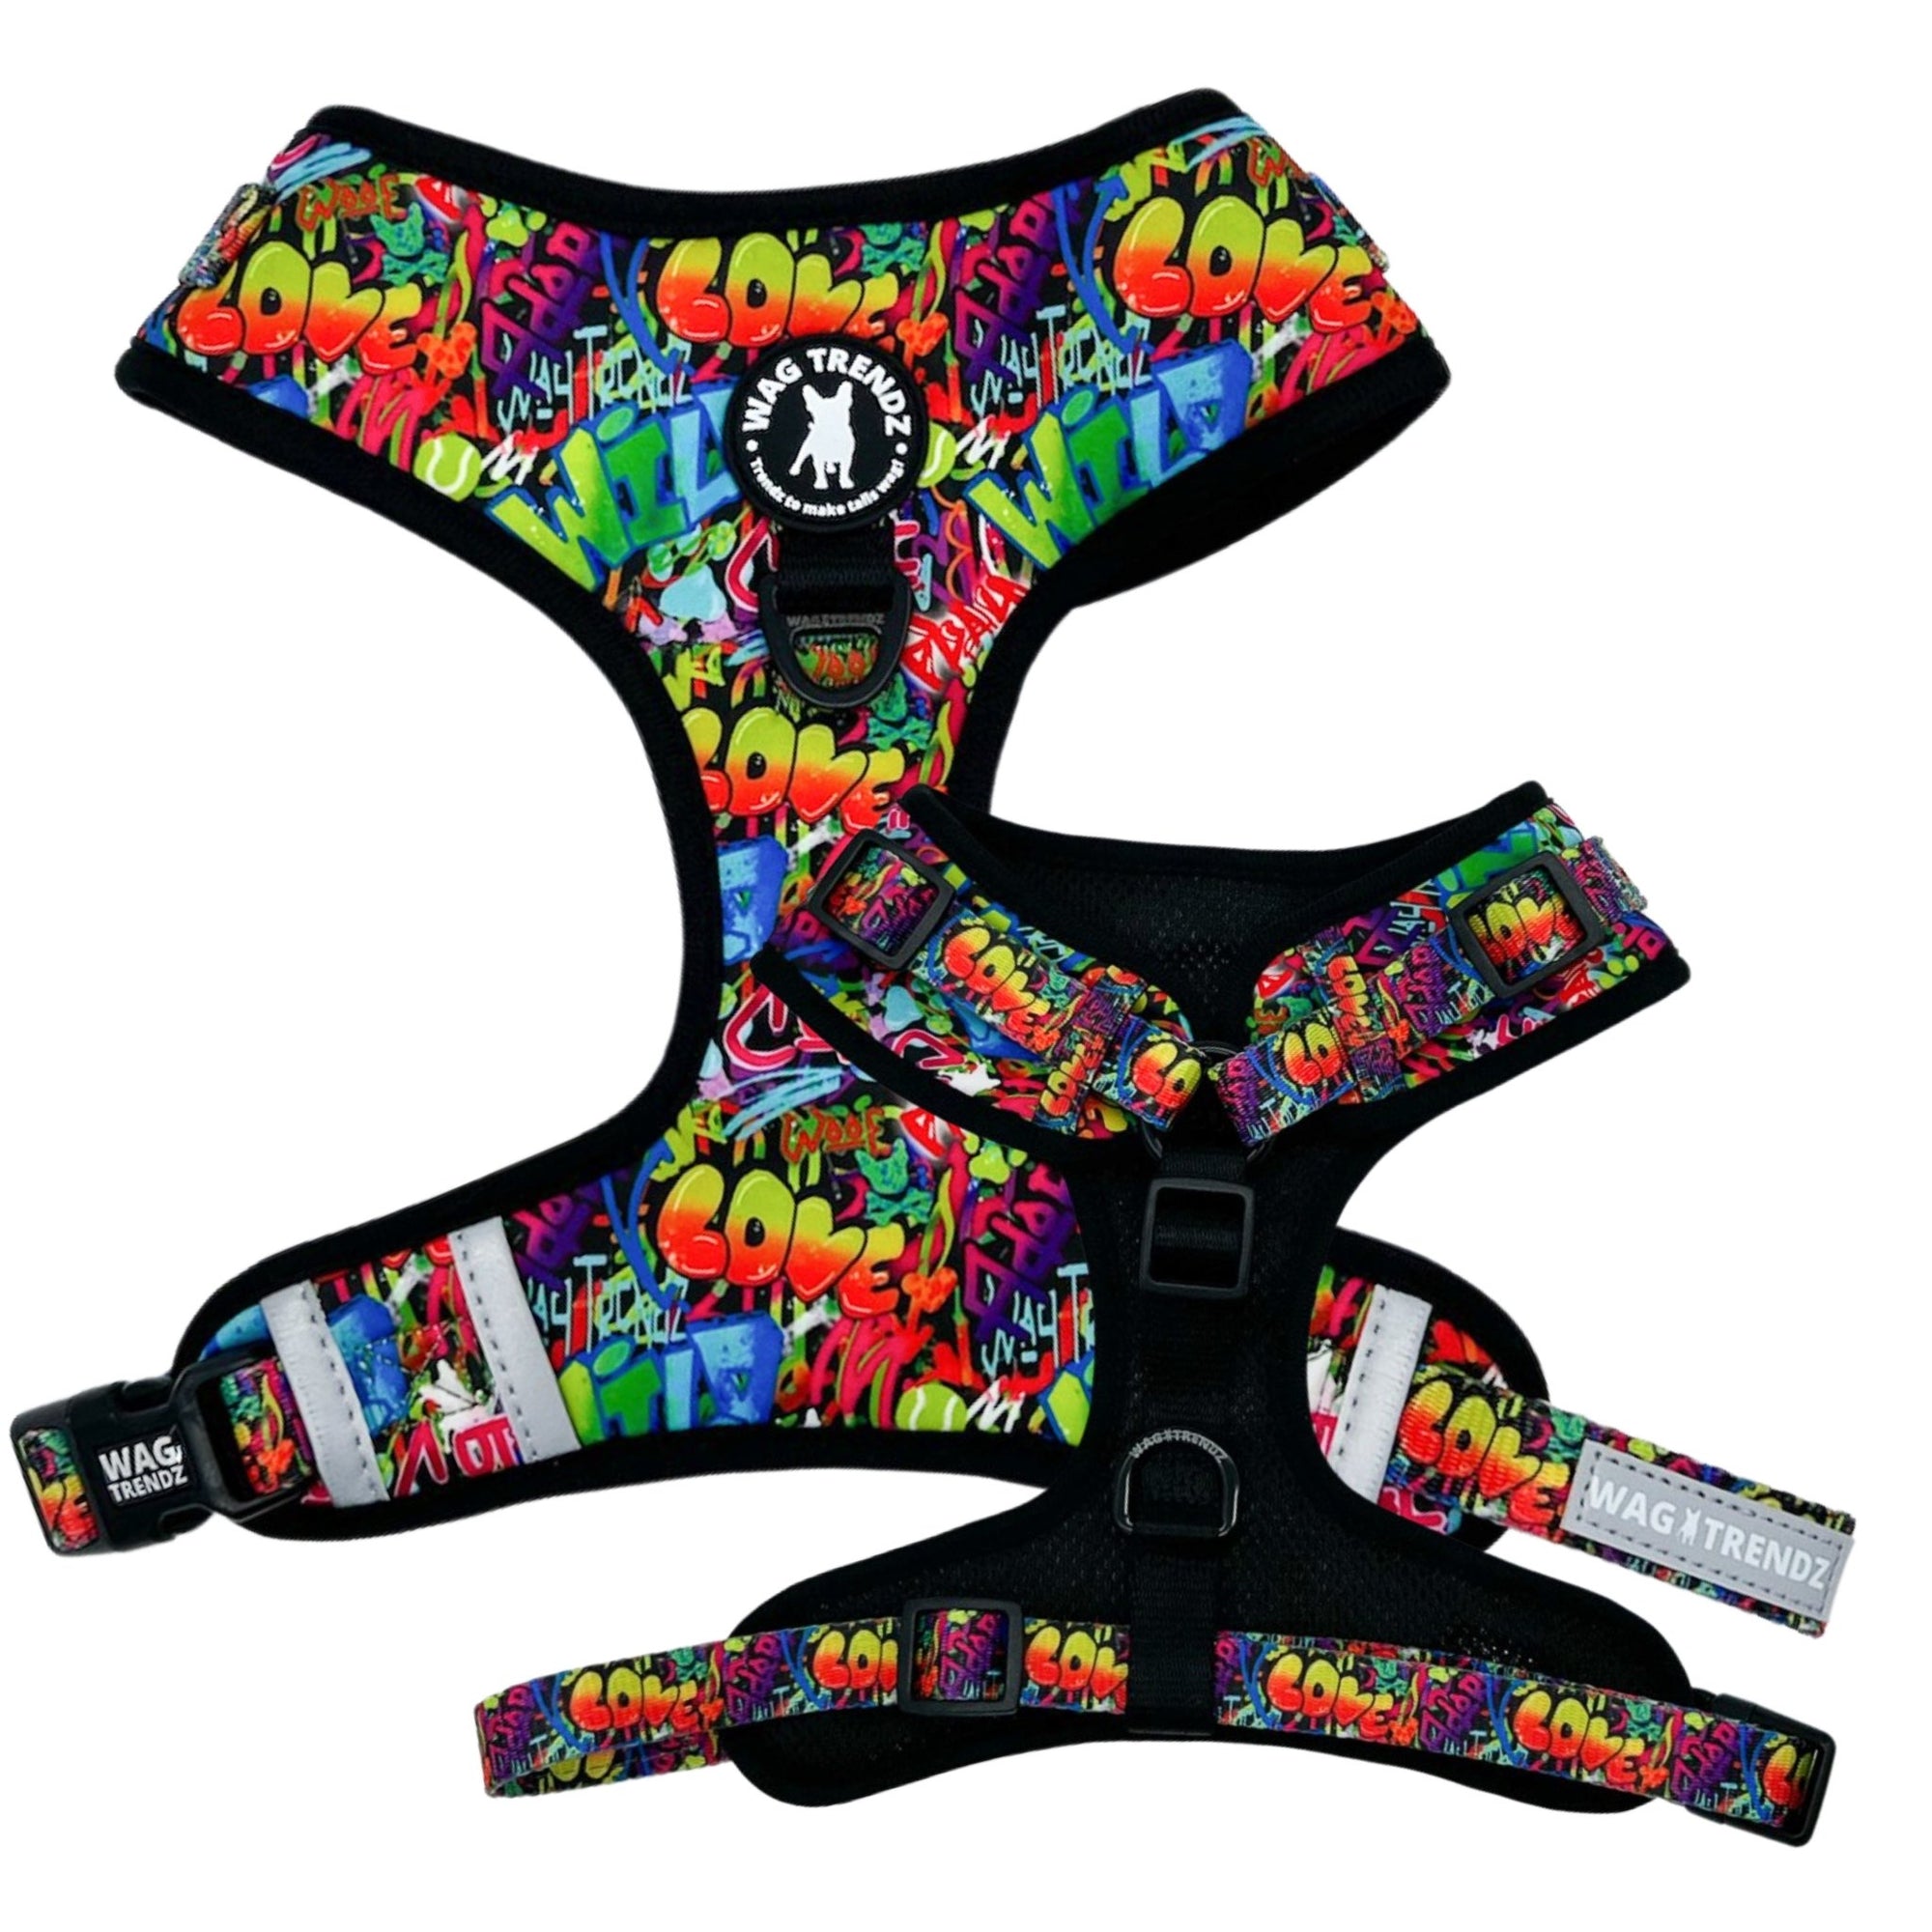 No Pull Dog Harness - Adjustable - Front Clip - multi-colored street graffiti on dog harness against solid white background - chest and back view - Wag Trendz